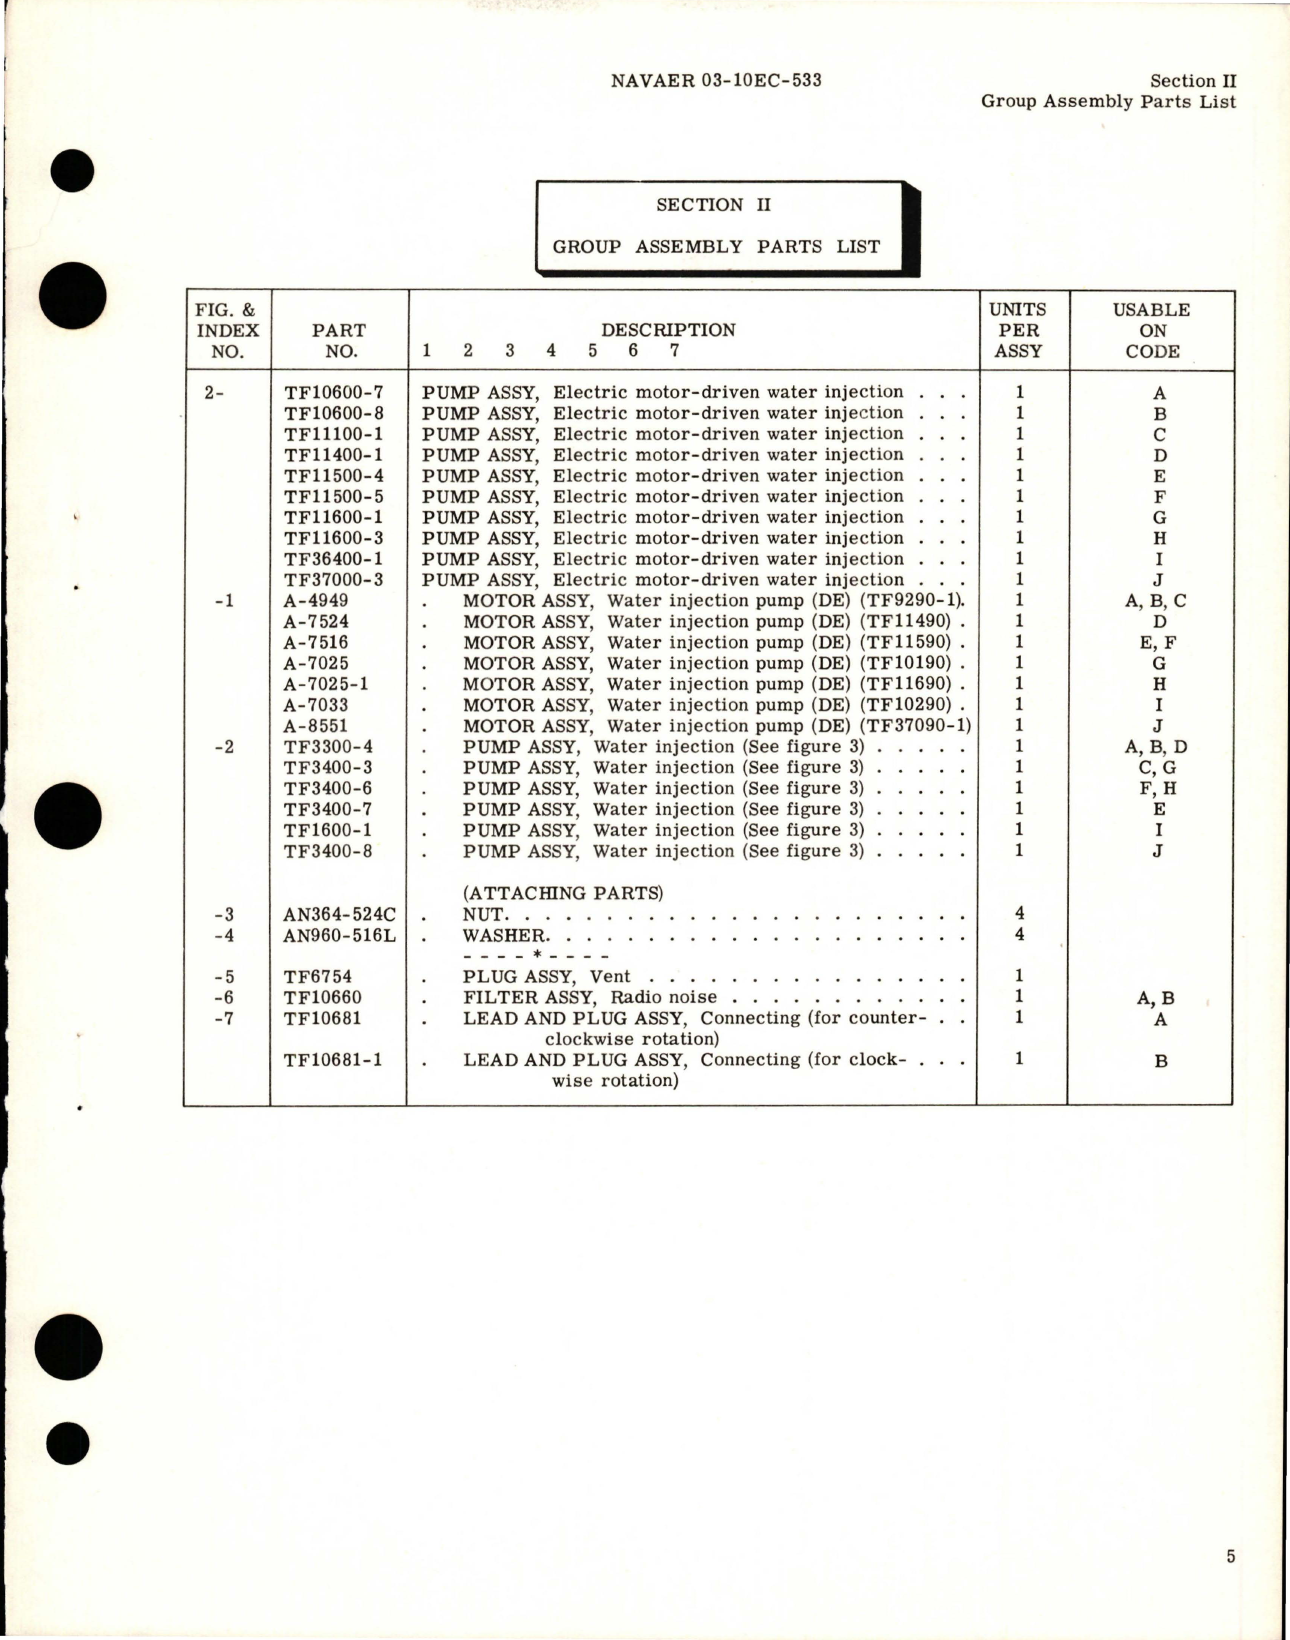 Sample page 7 from AirCorps Library document: Illustrated Parts Breakdown for Electric Motor-Driven Water Injection Pumps